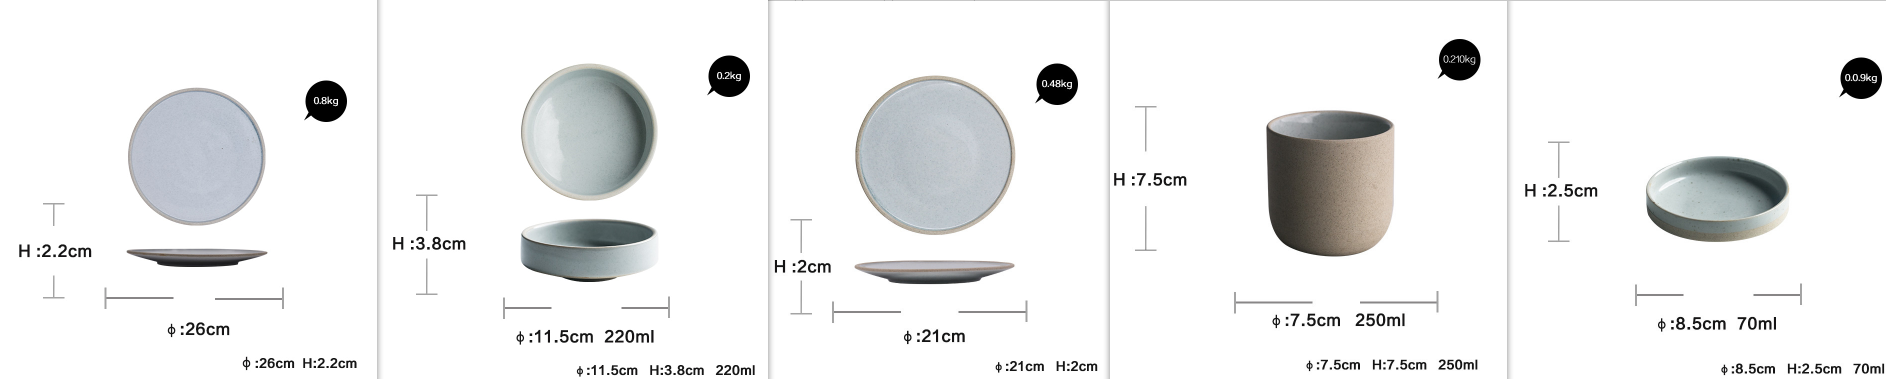 Household Dinner Plate, Flat Plate, Bowl And Plate Set - SELFTRITSS